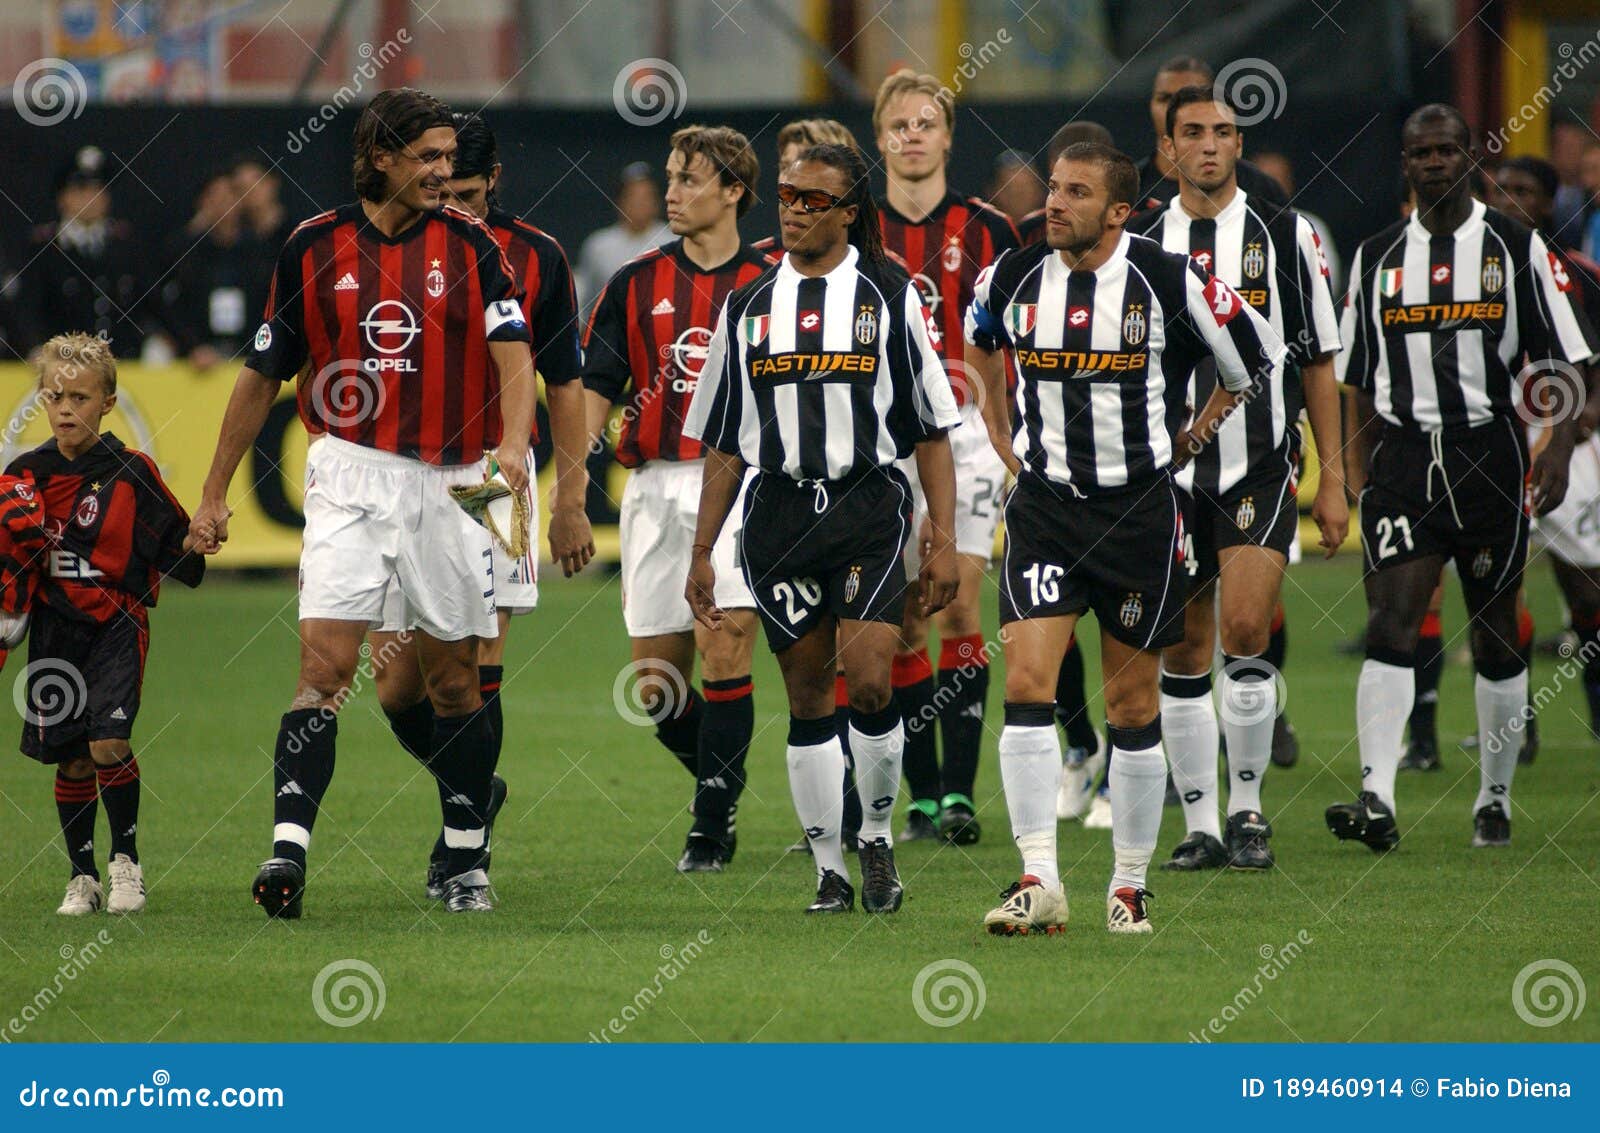 The Milan and Juventus Players Enter the Field the Editorial Stock Image - Image of players, august: 189460914